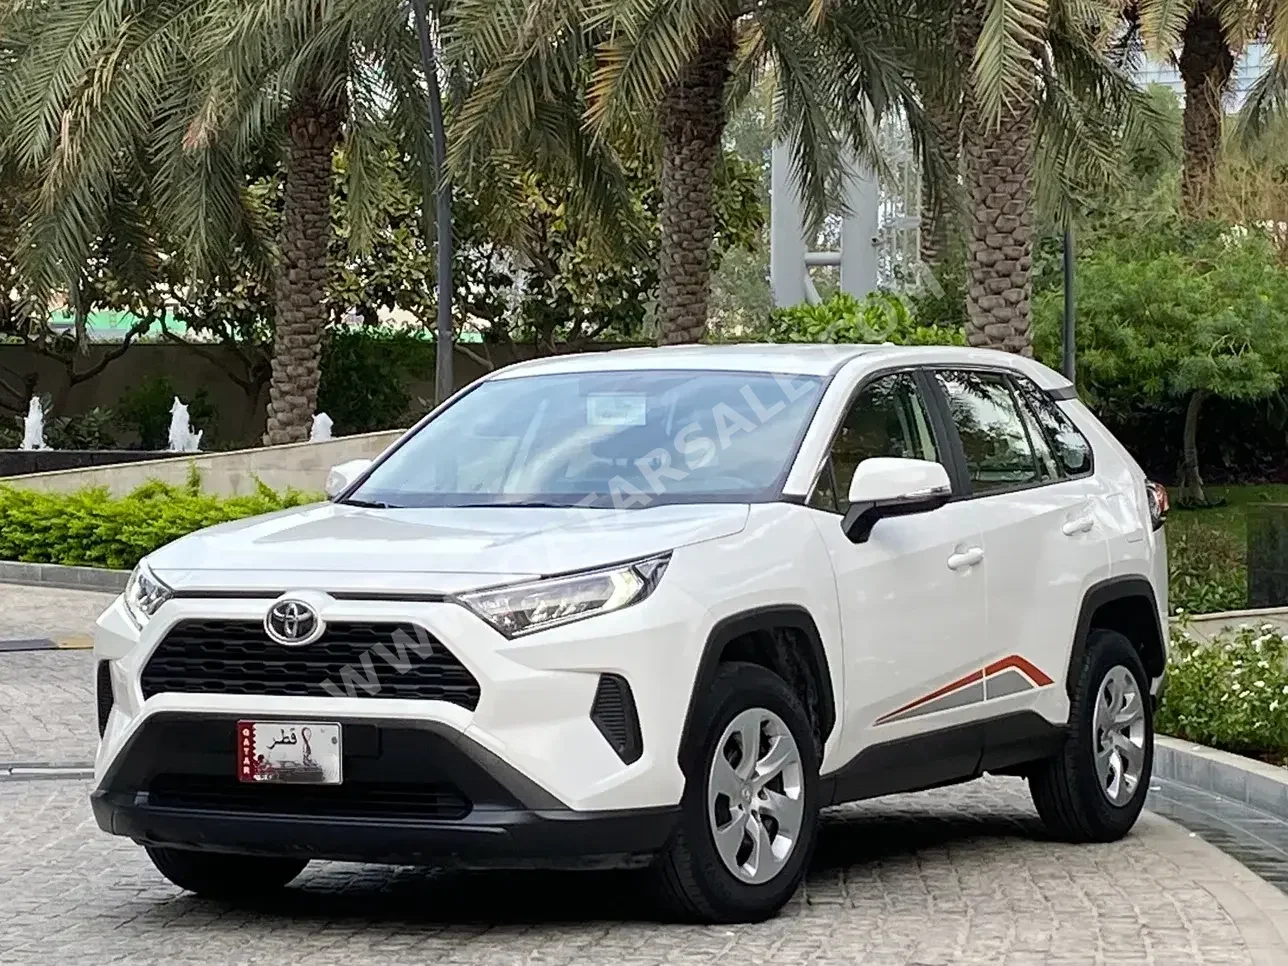 Toyota  Rav 4  2022  Automatic  20,000 Km  4 Cylinder  Front Wheel Drive (FWD)  SUV  White  With Warranty